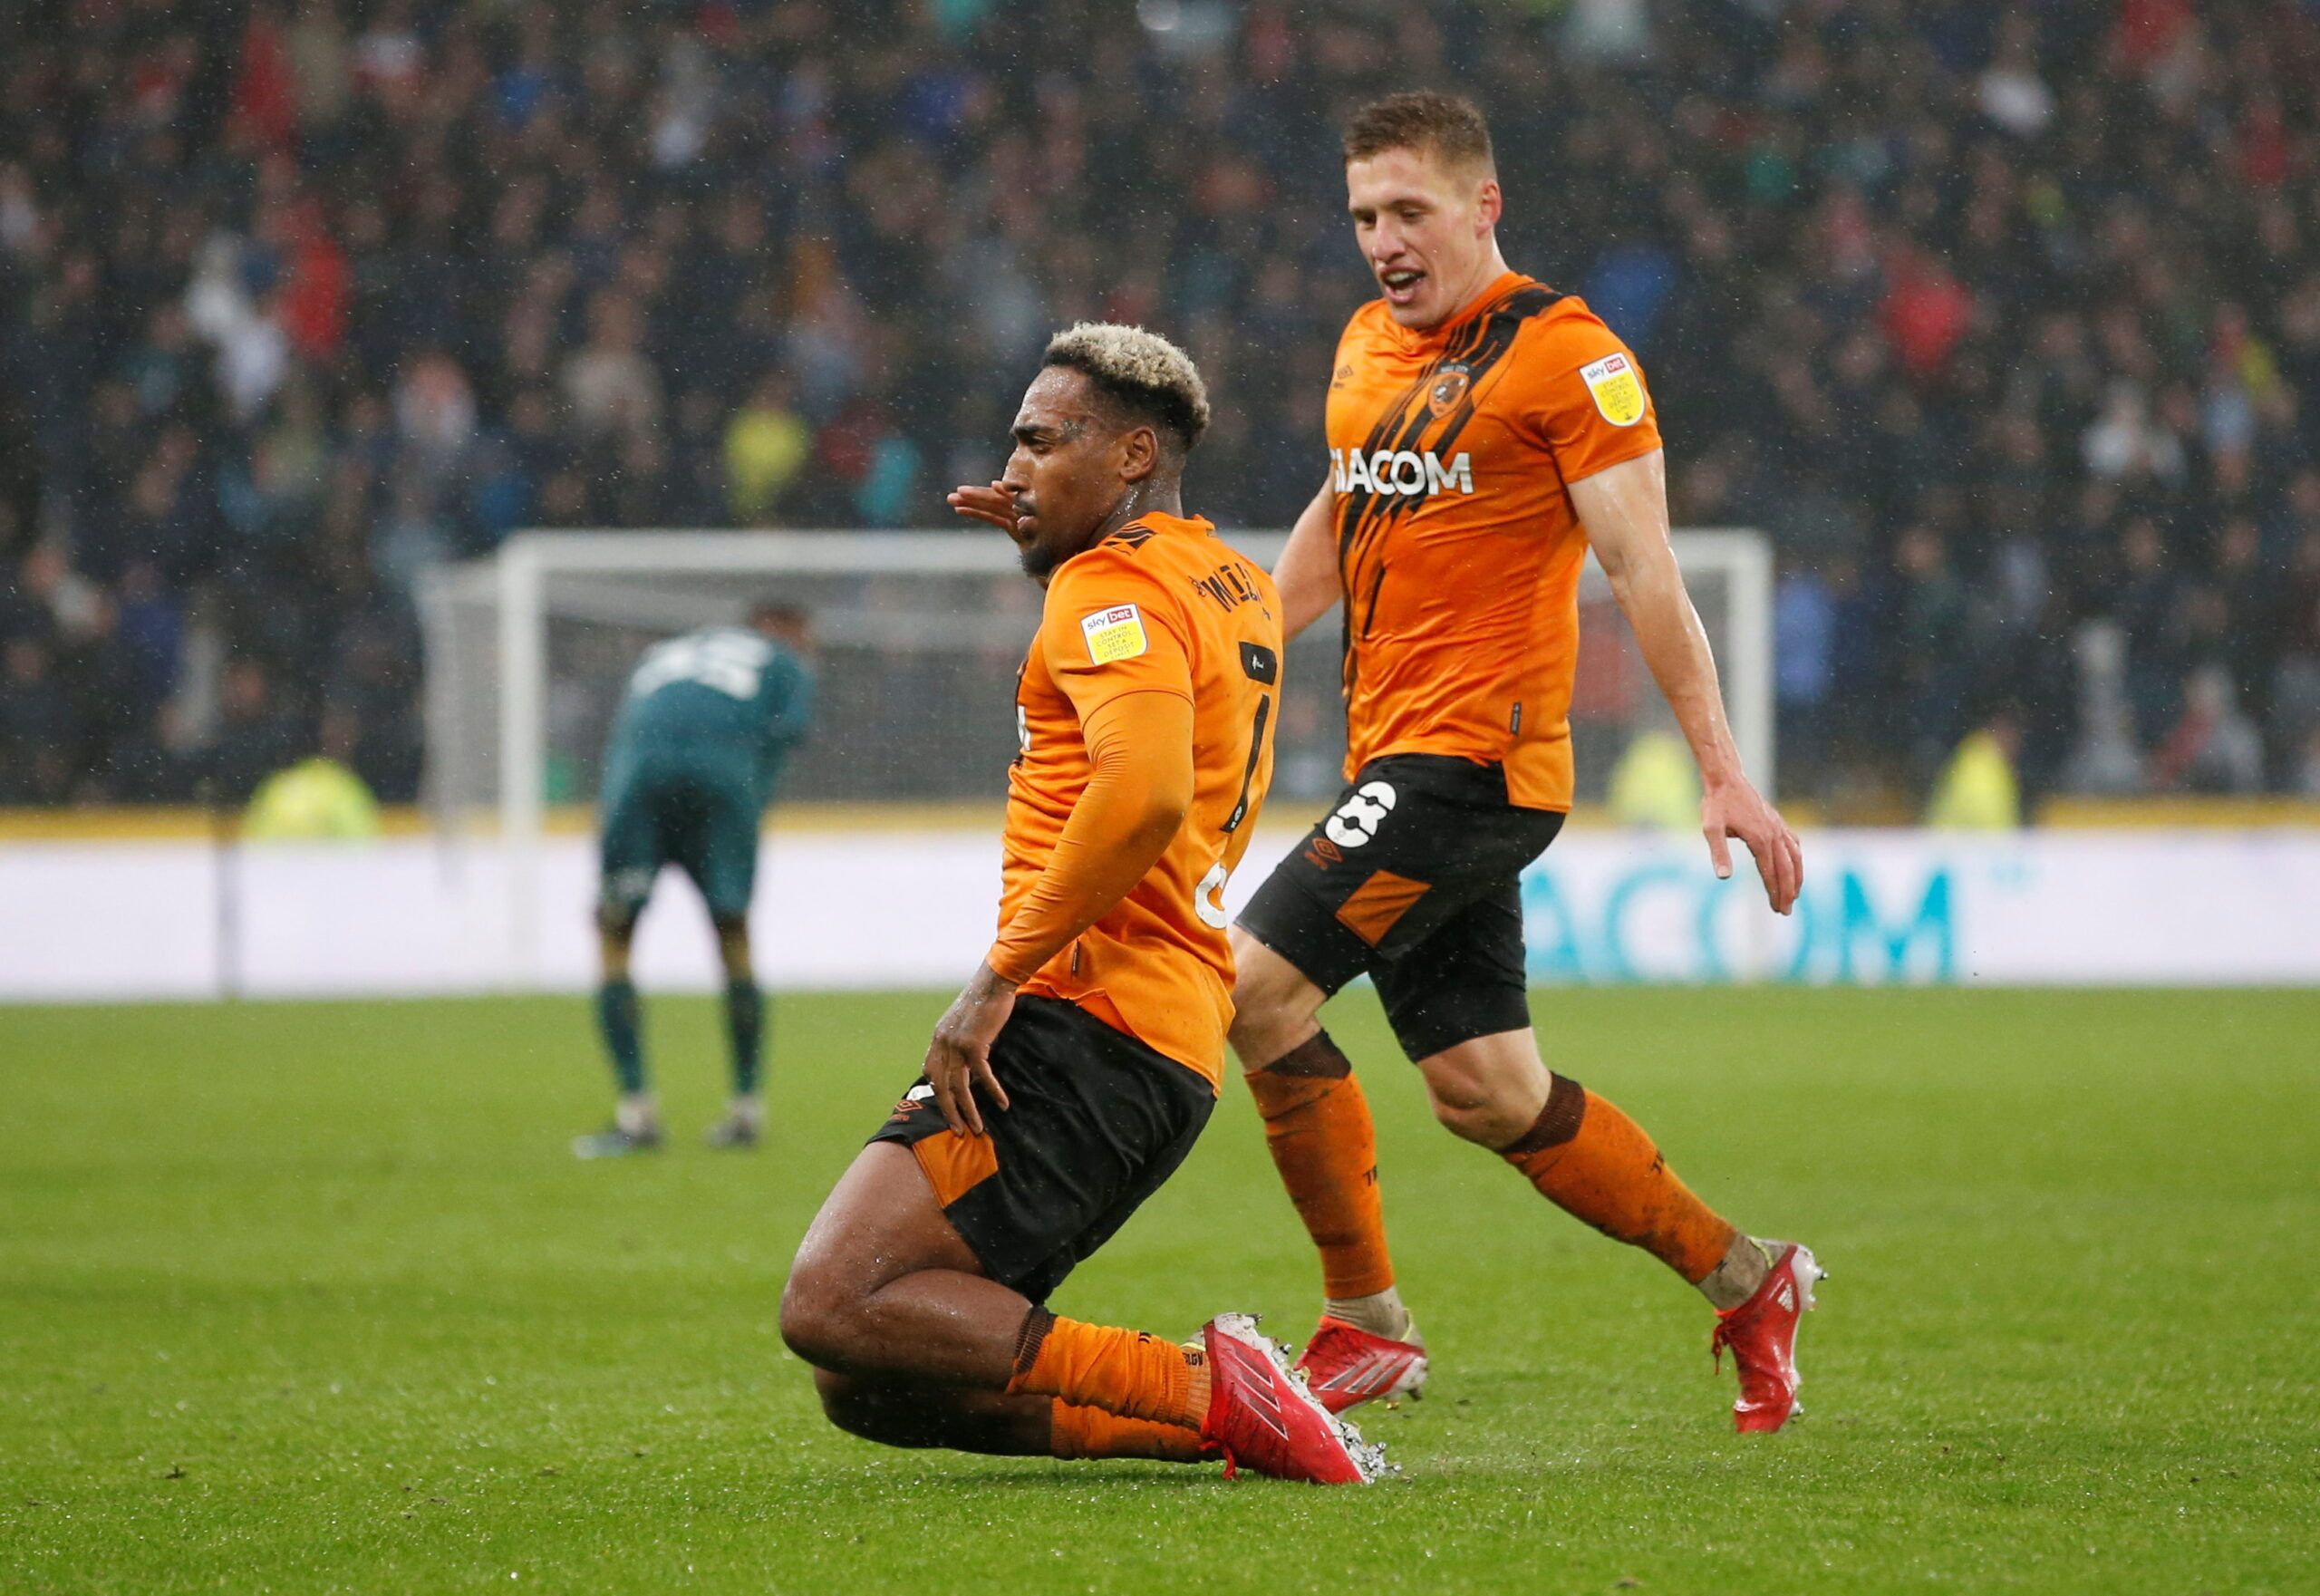 Soccer Football - Championship - Hull City v Middlesbrough - KCOM Stadium, Hull, Britain - October 2, 2021  Hull City's Mallik Wilks celebrates scoring their second goal  Action Images/Ed Sykes  EDITORIAL USE ONLY. No use with unauthorized audio, video, data, fixture lists, club/league logos or 